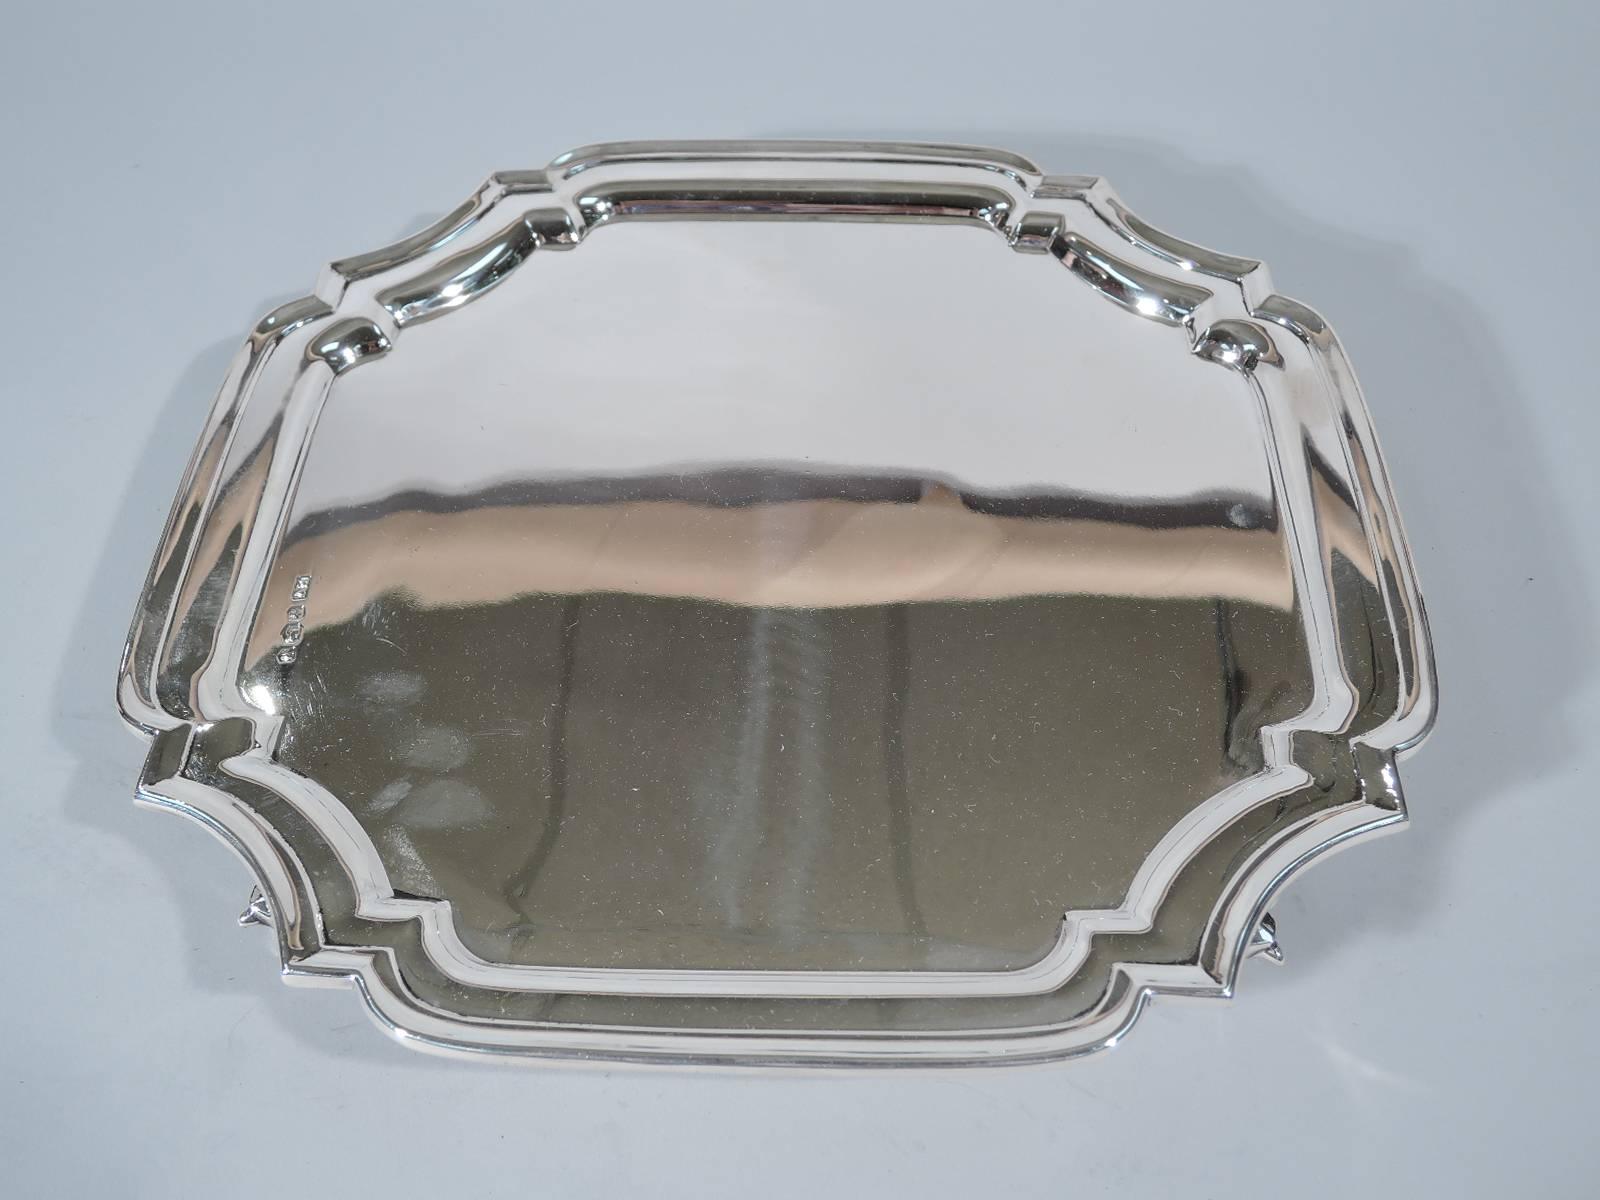 Traditional sterling silver salver tray. Made by Edward Viner in Sheffield in 1964. Four curved sides with concave corners and molded rim. Rests on four leaf-capped volute scrolls. Hallmarked. Very good condition.

Dimensions: H 1 1/4 x W 10 5/8 x